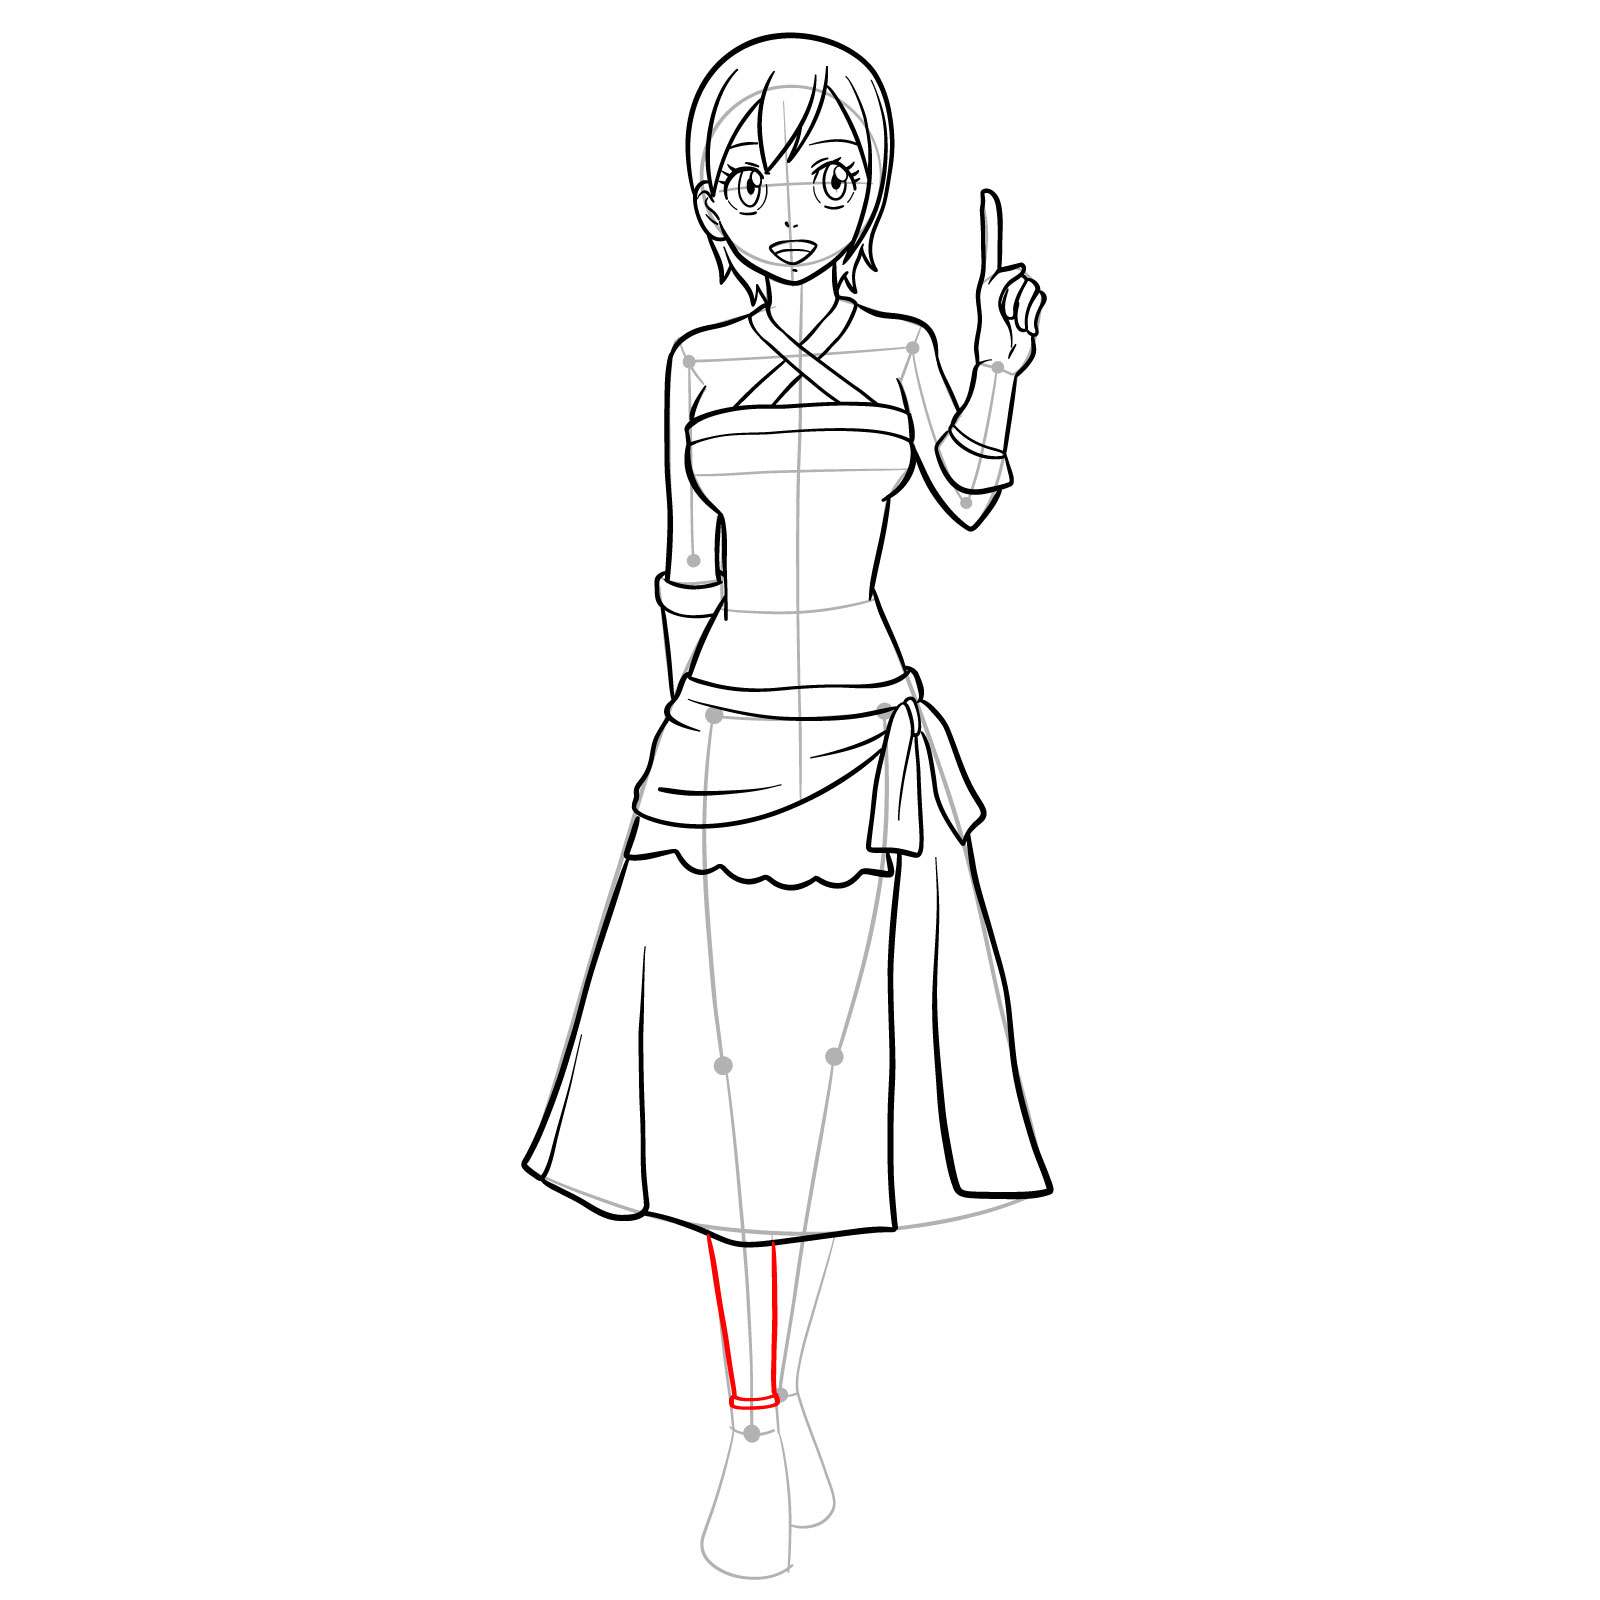 How to draw Lisanna Strauss from Fairy Tail - step 29